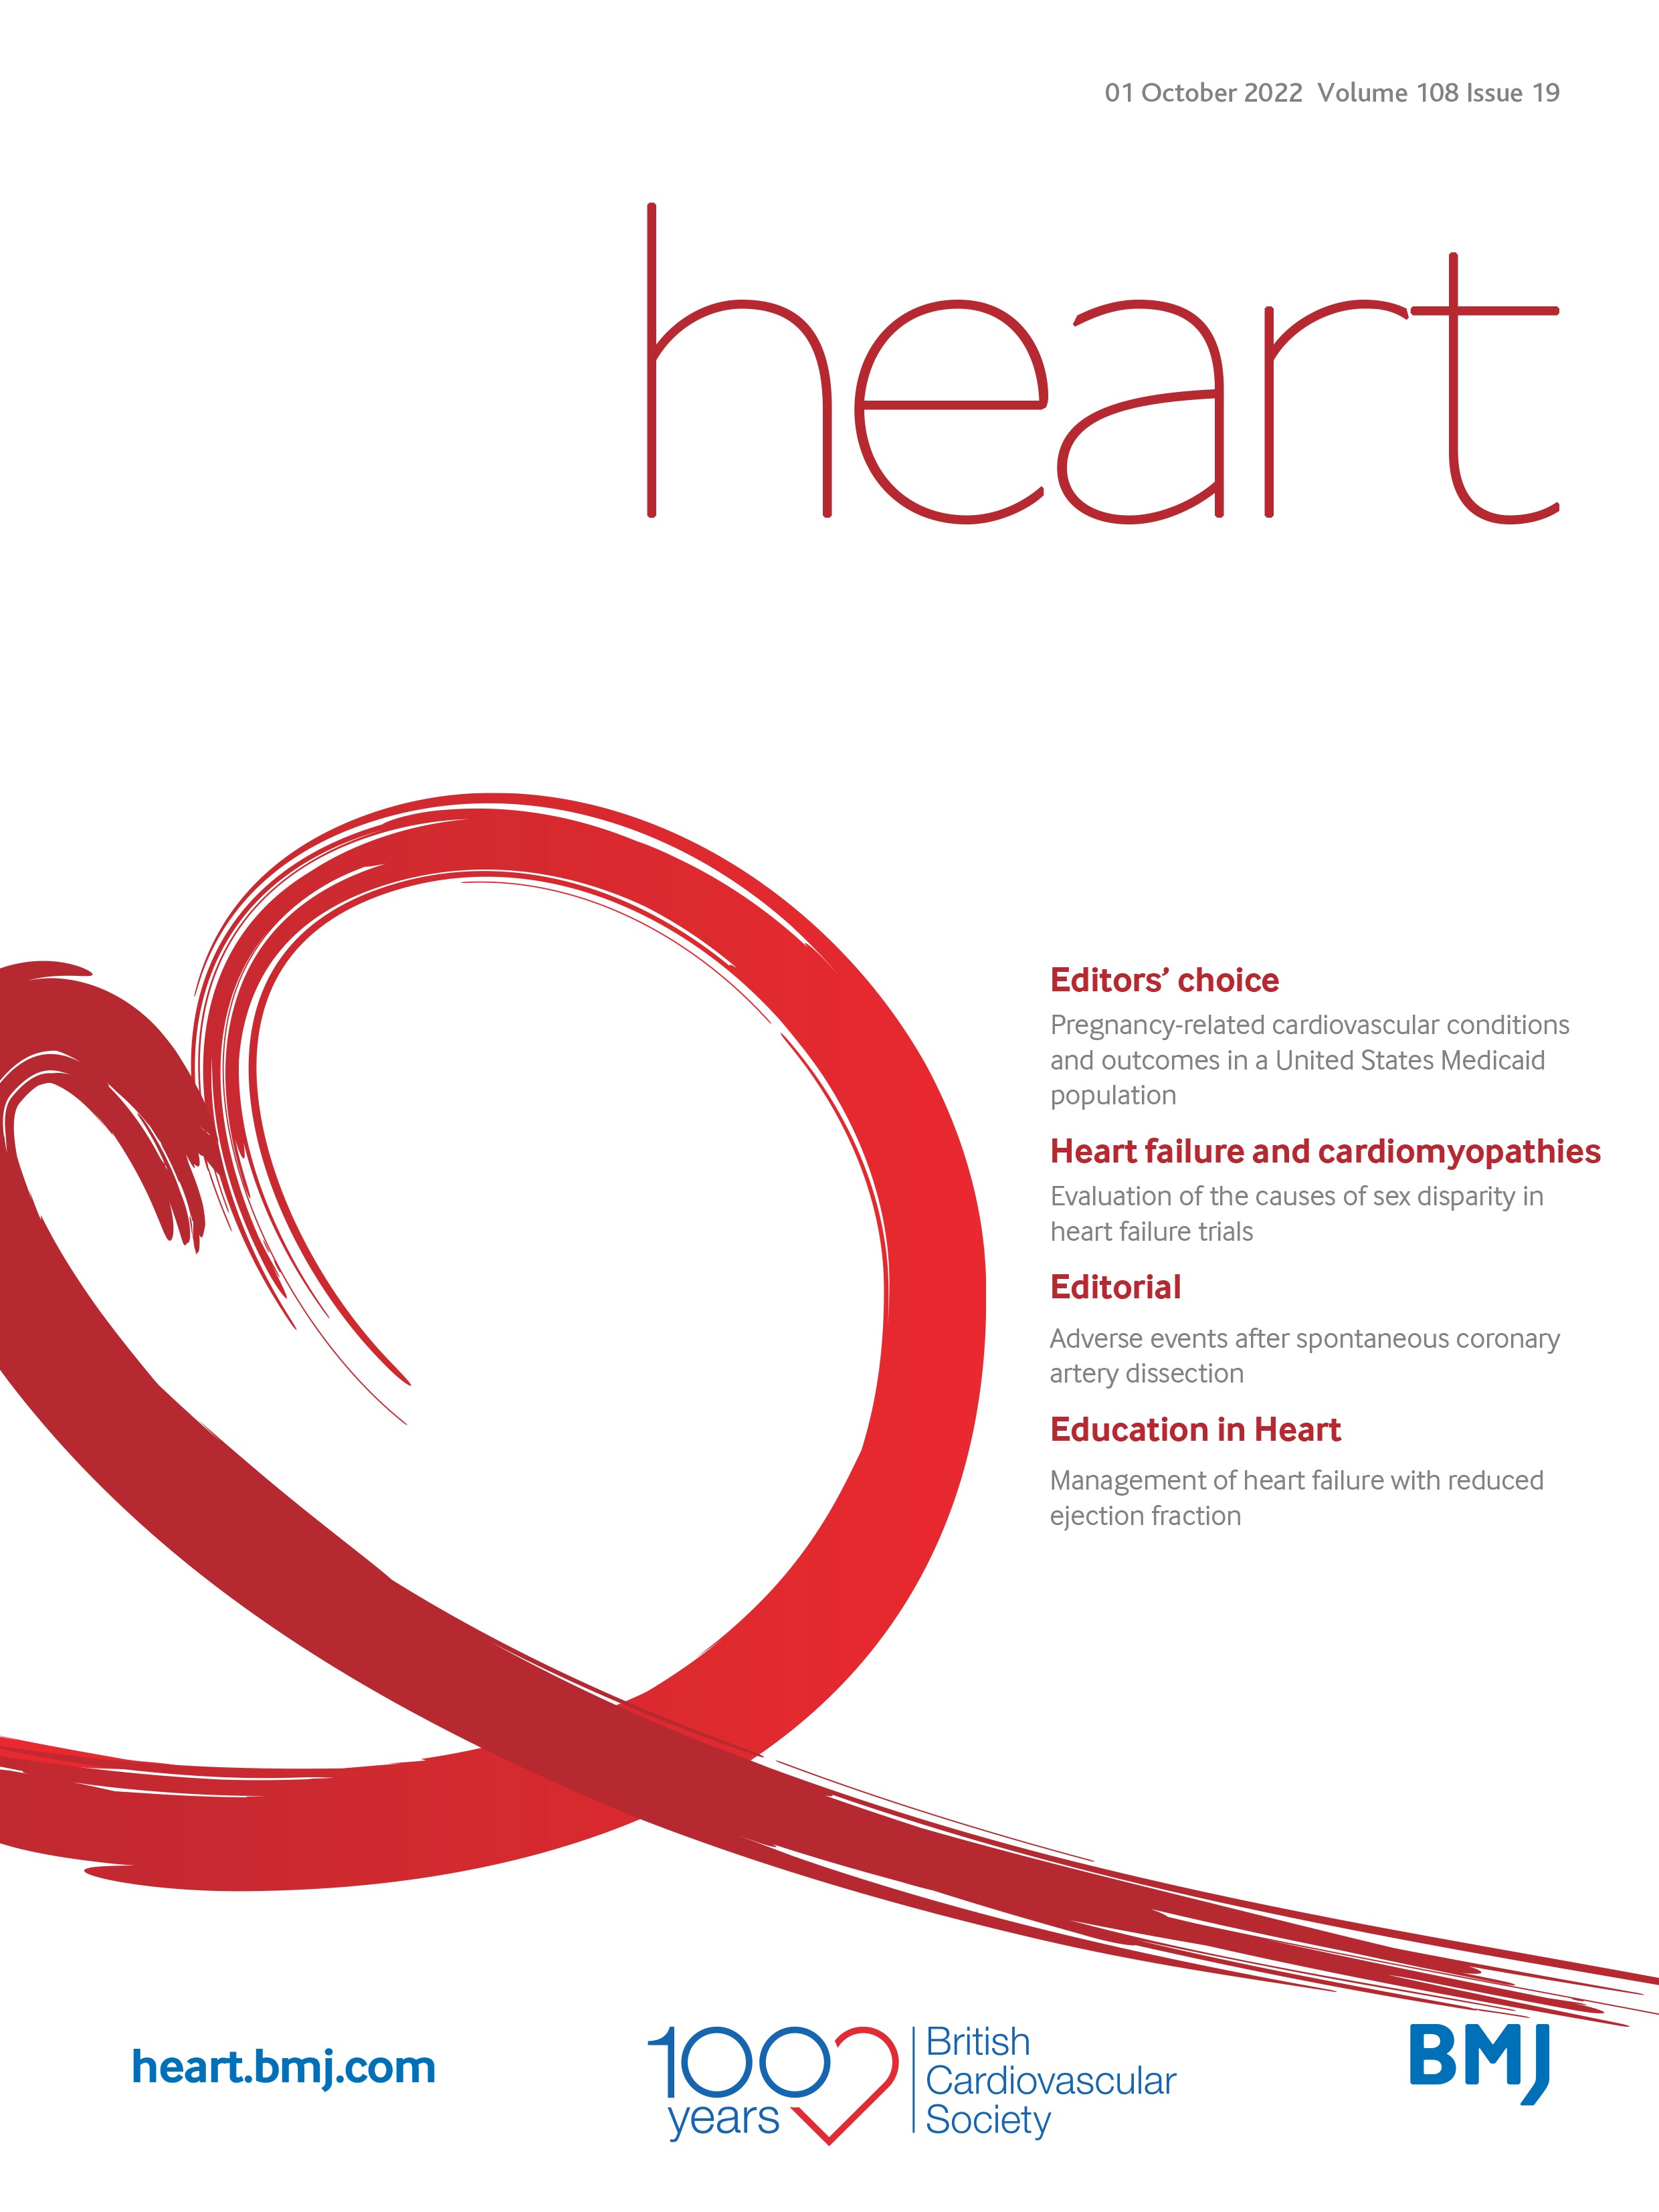 Heartbeat: cardiovascular maternal health and disparities in clinical outcomes